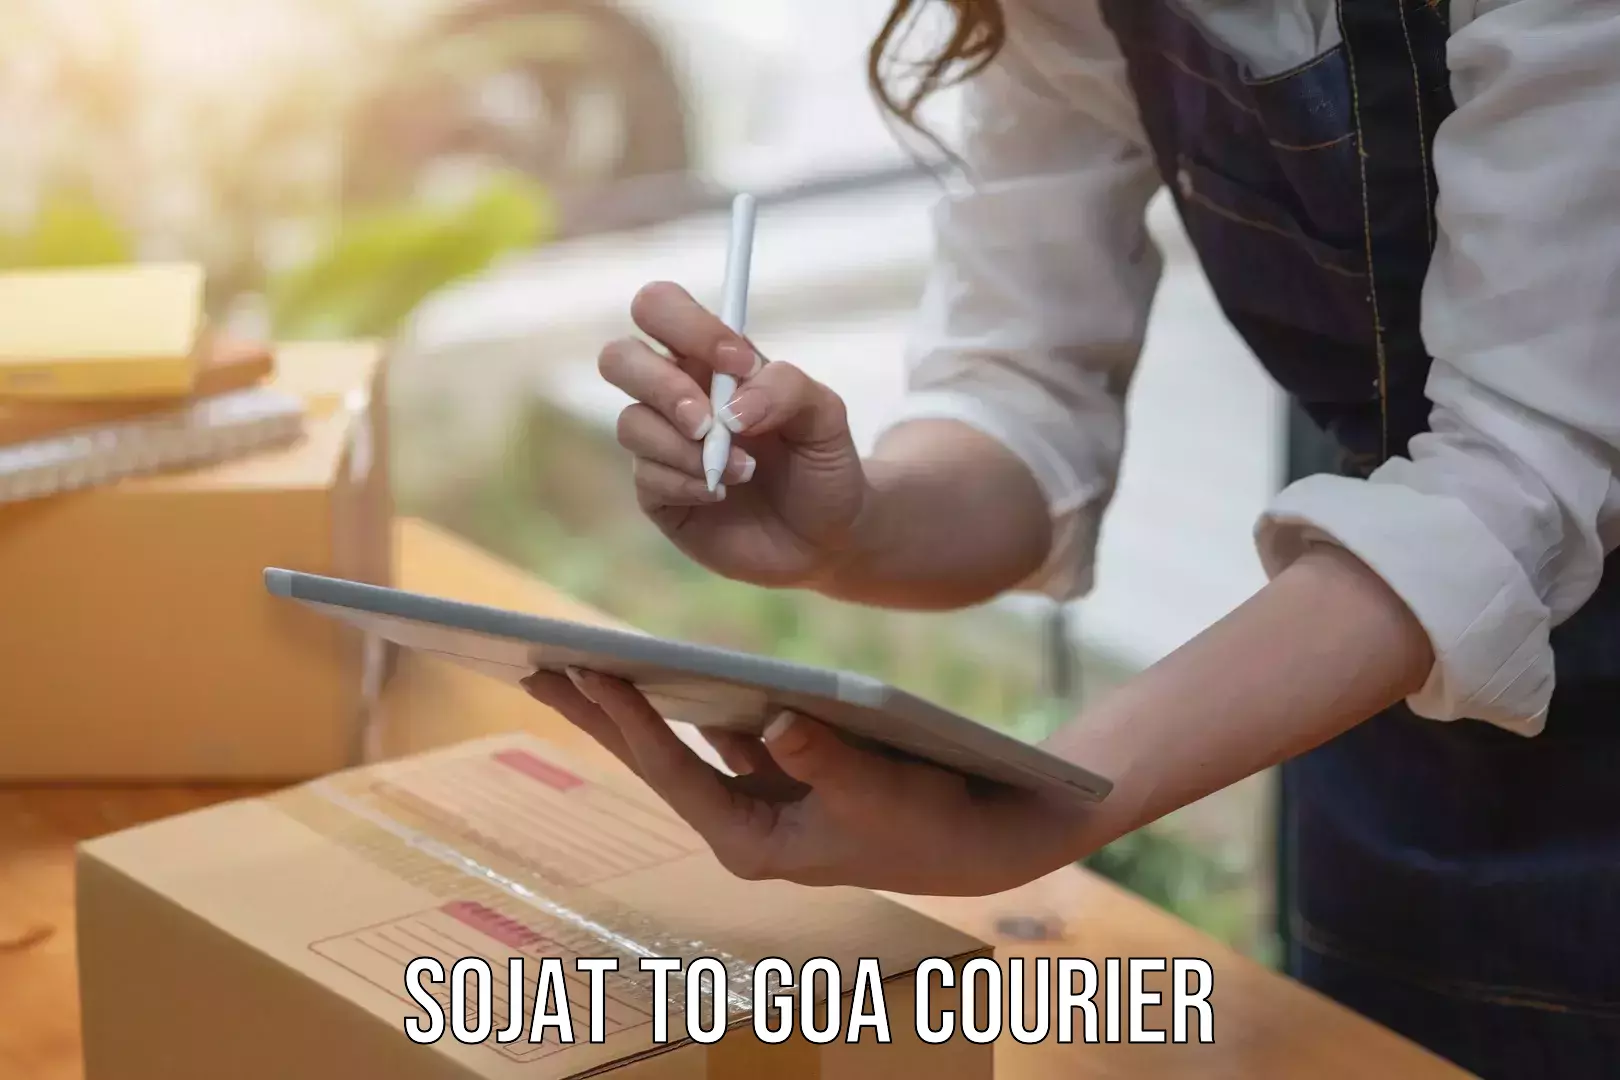 Reliable delivery network Sojat to Goa